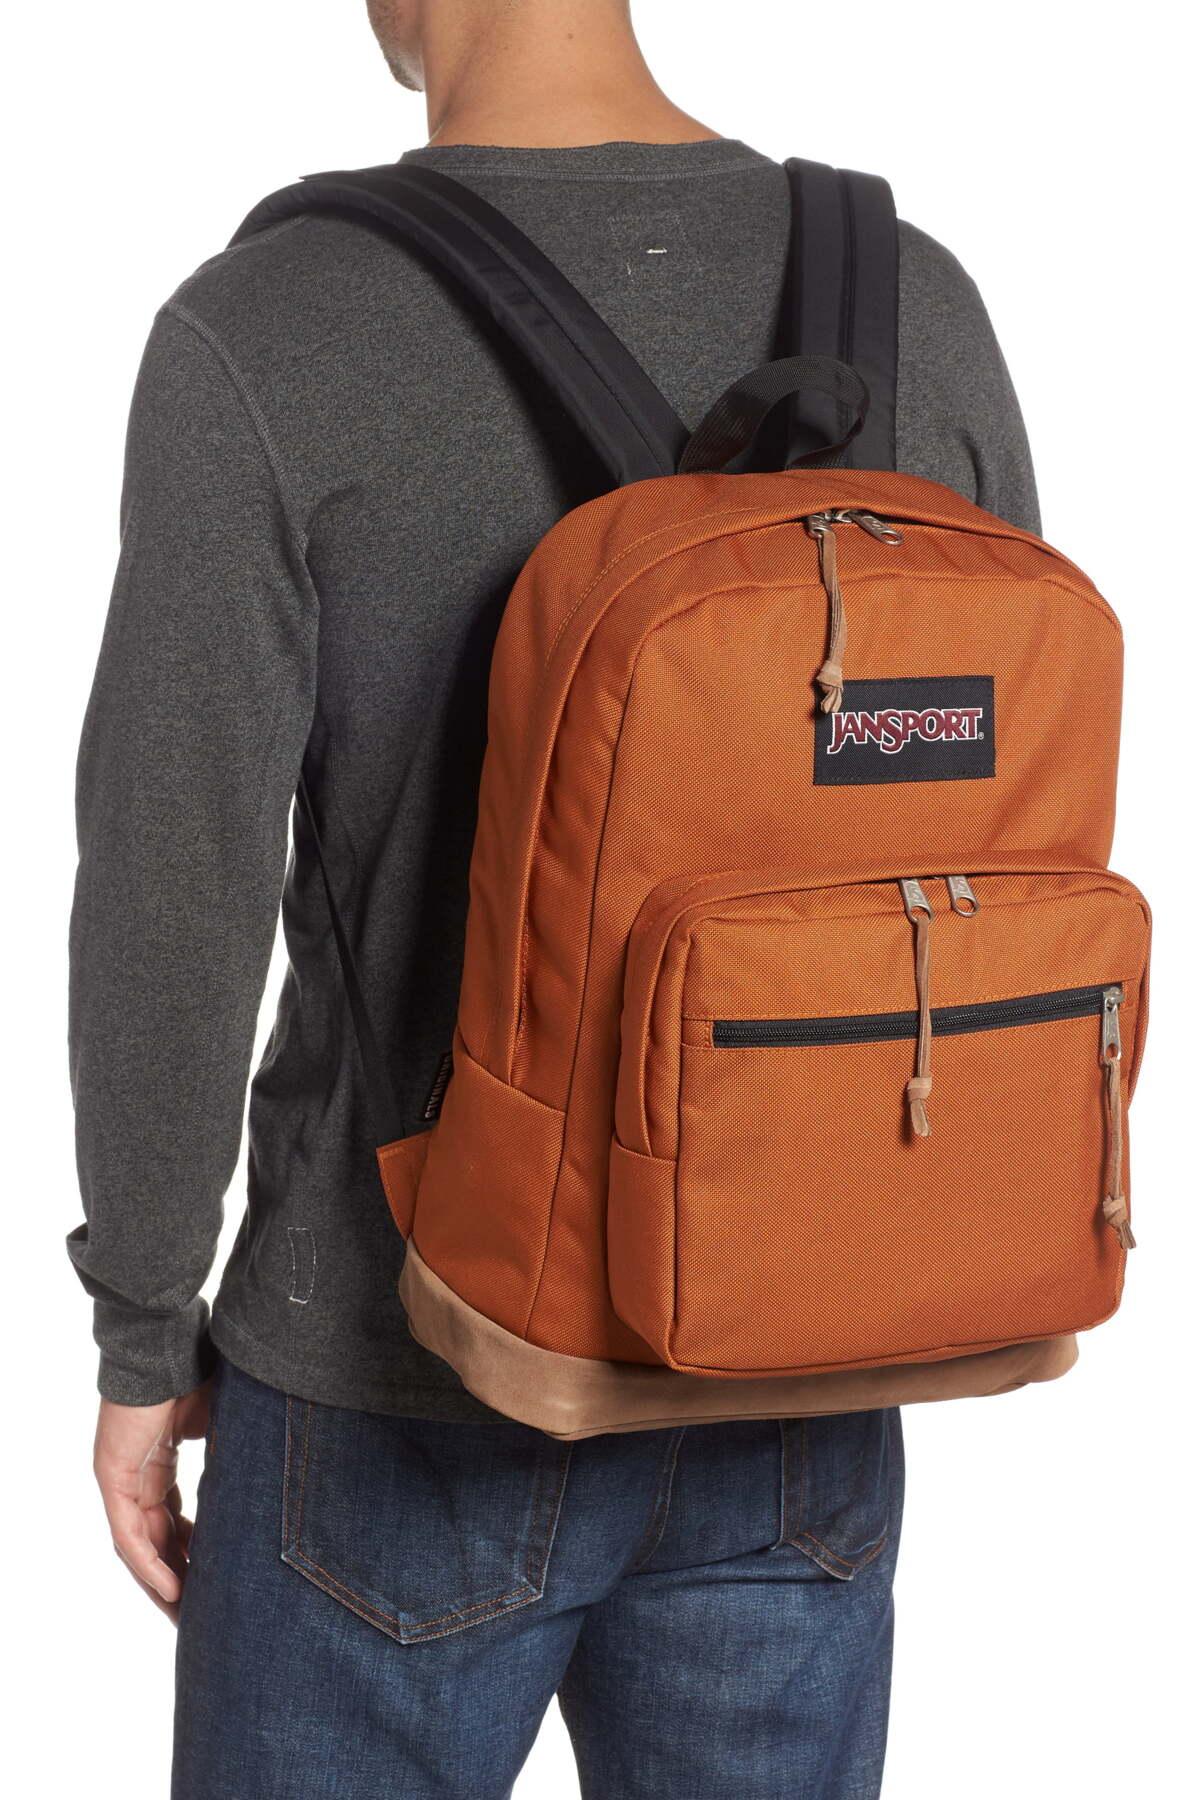 Jansport Suede Right Pack Backpack in Brown for Men - Lyst